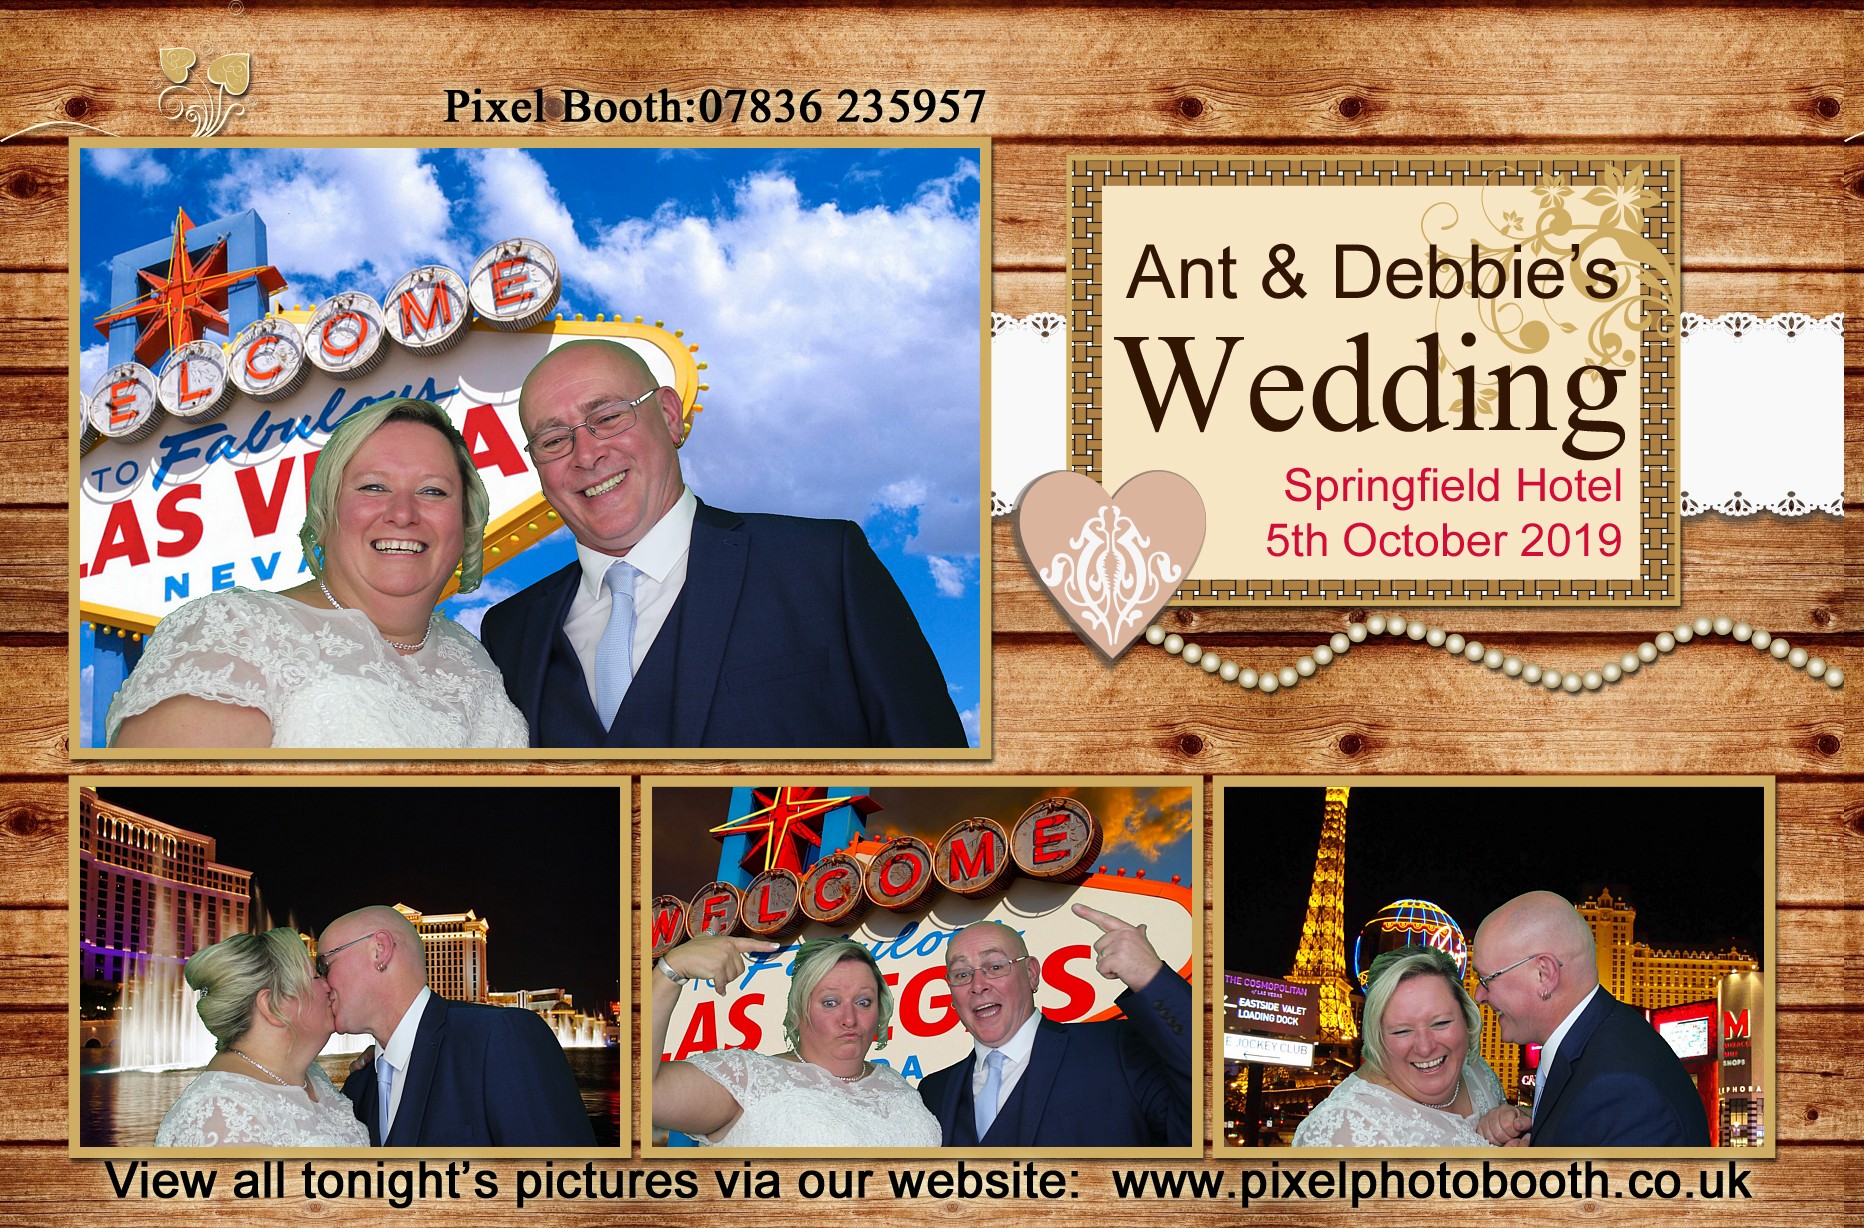 5th Oct 2019: Ant and Debbie's Wedding at Springfield Hotel